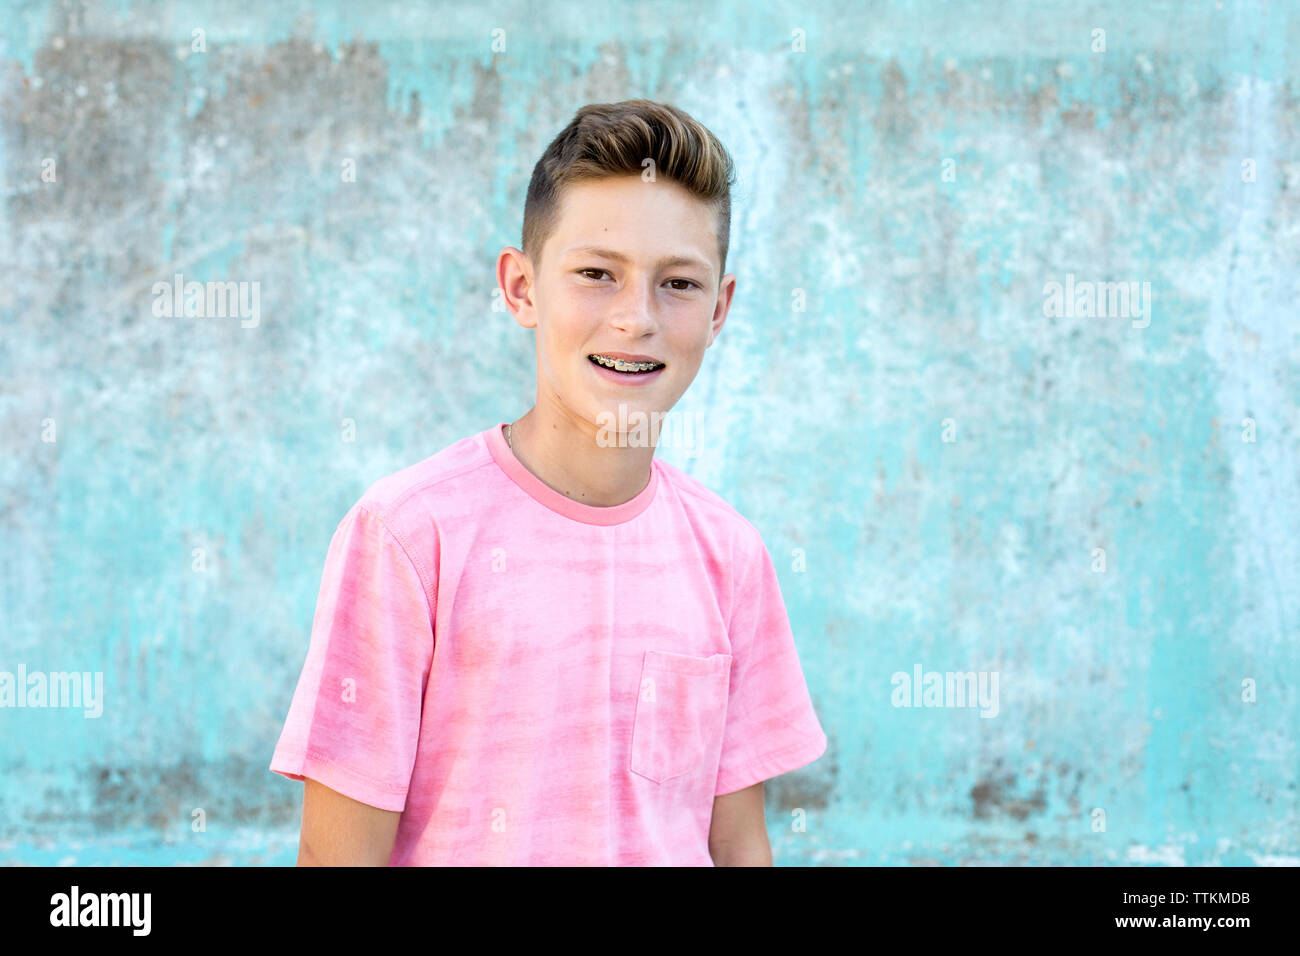 Smiling portrait of a handsome teen boy with braces Stock Photo